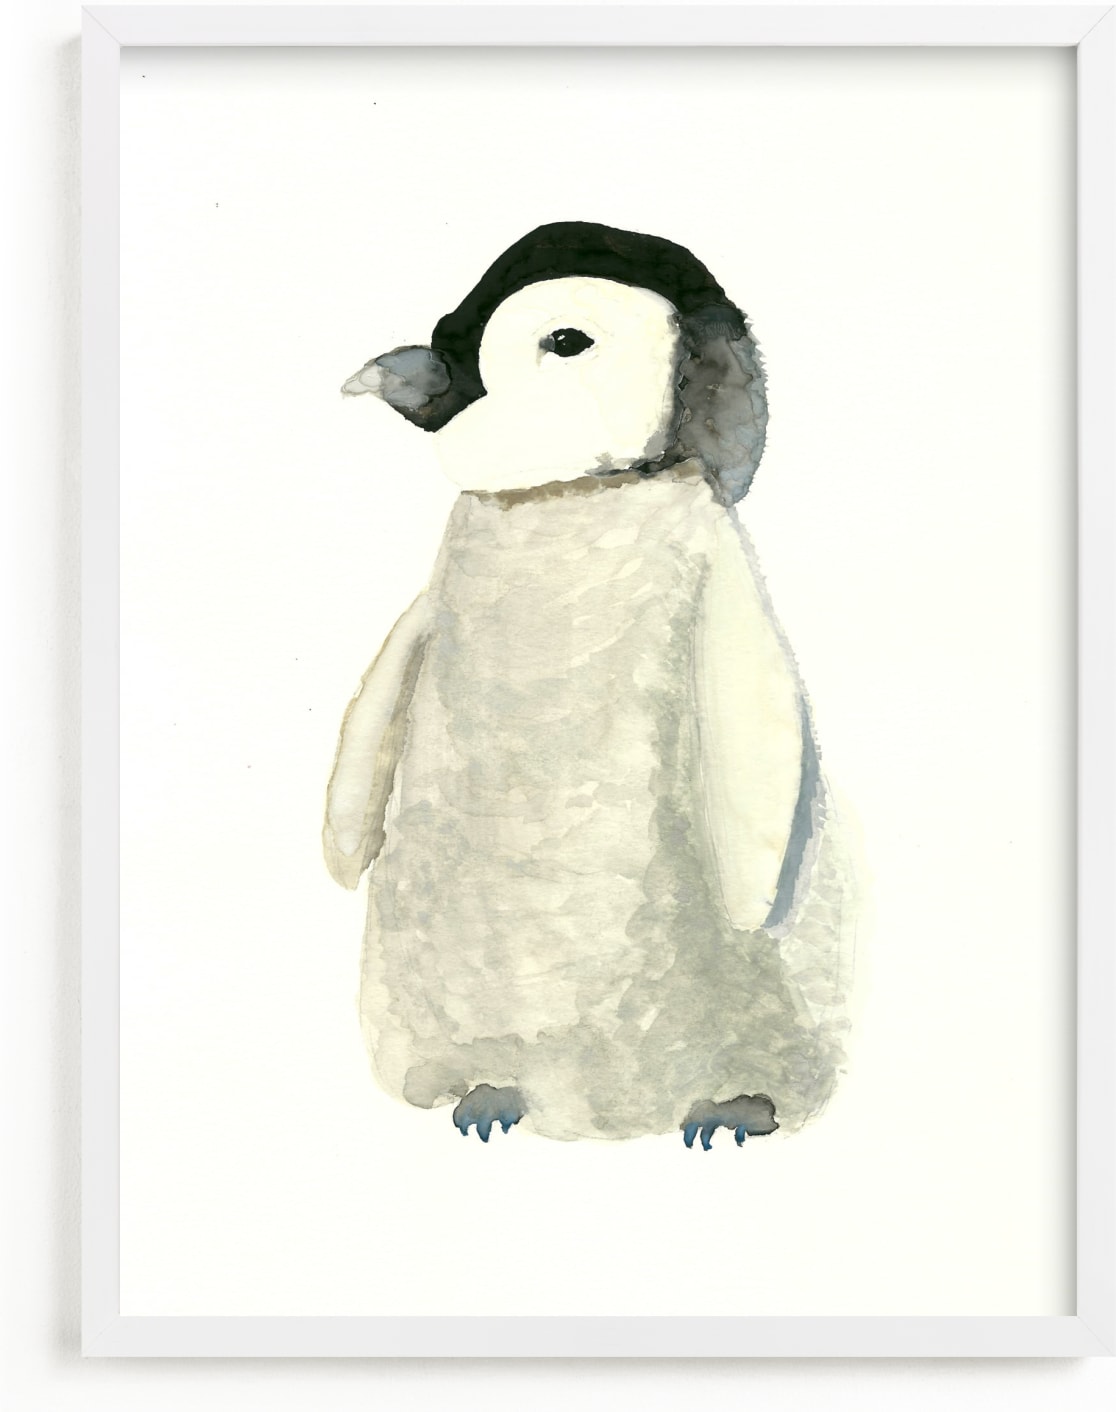 This is a white nursery wall art by Lizzie Bowman called The Cold Fuzzies.